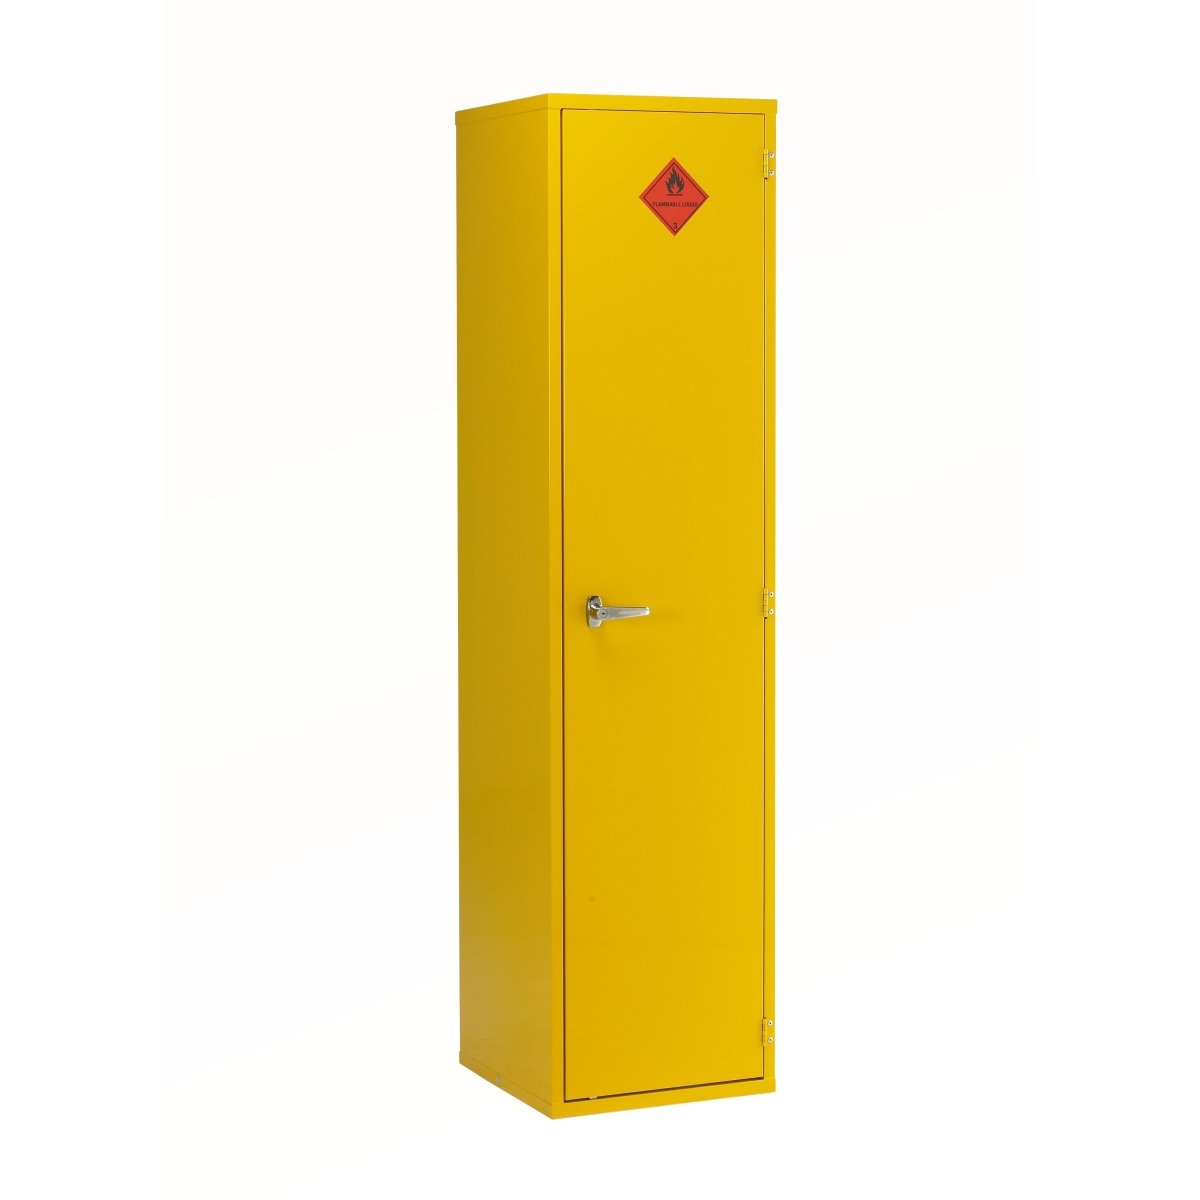 Heavy Duty Hazardous Cabinet With Shelves (12 Models) - Warehouse Storage Products